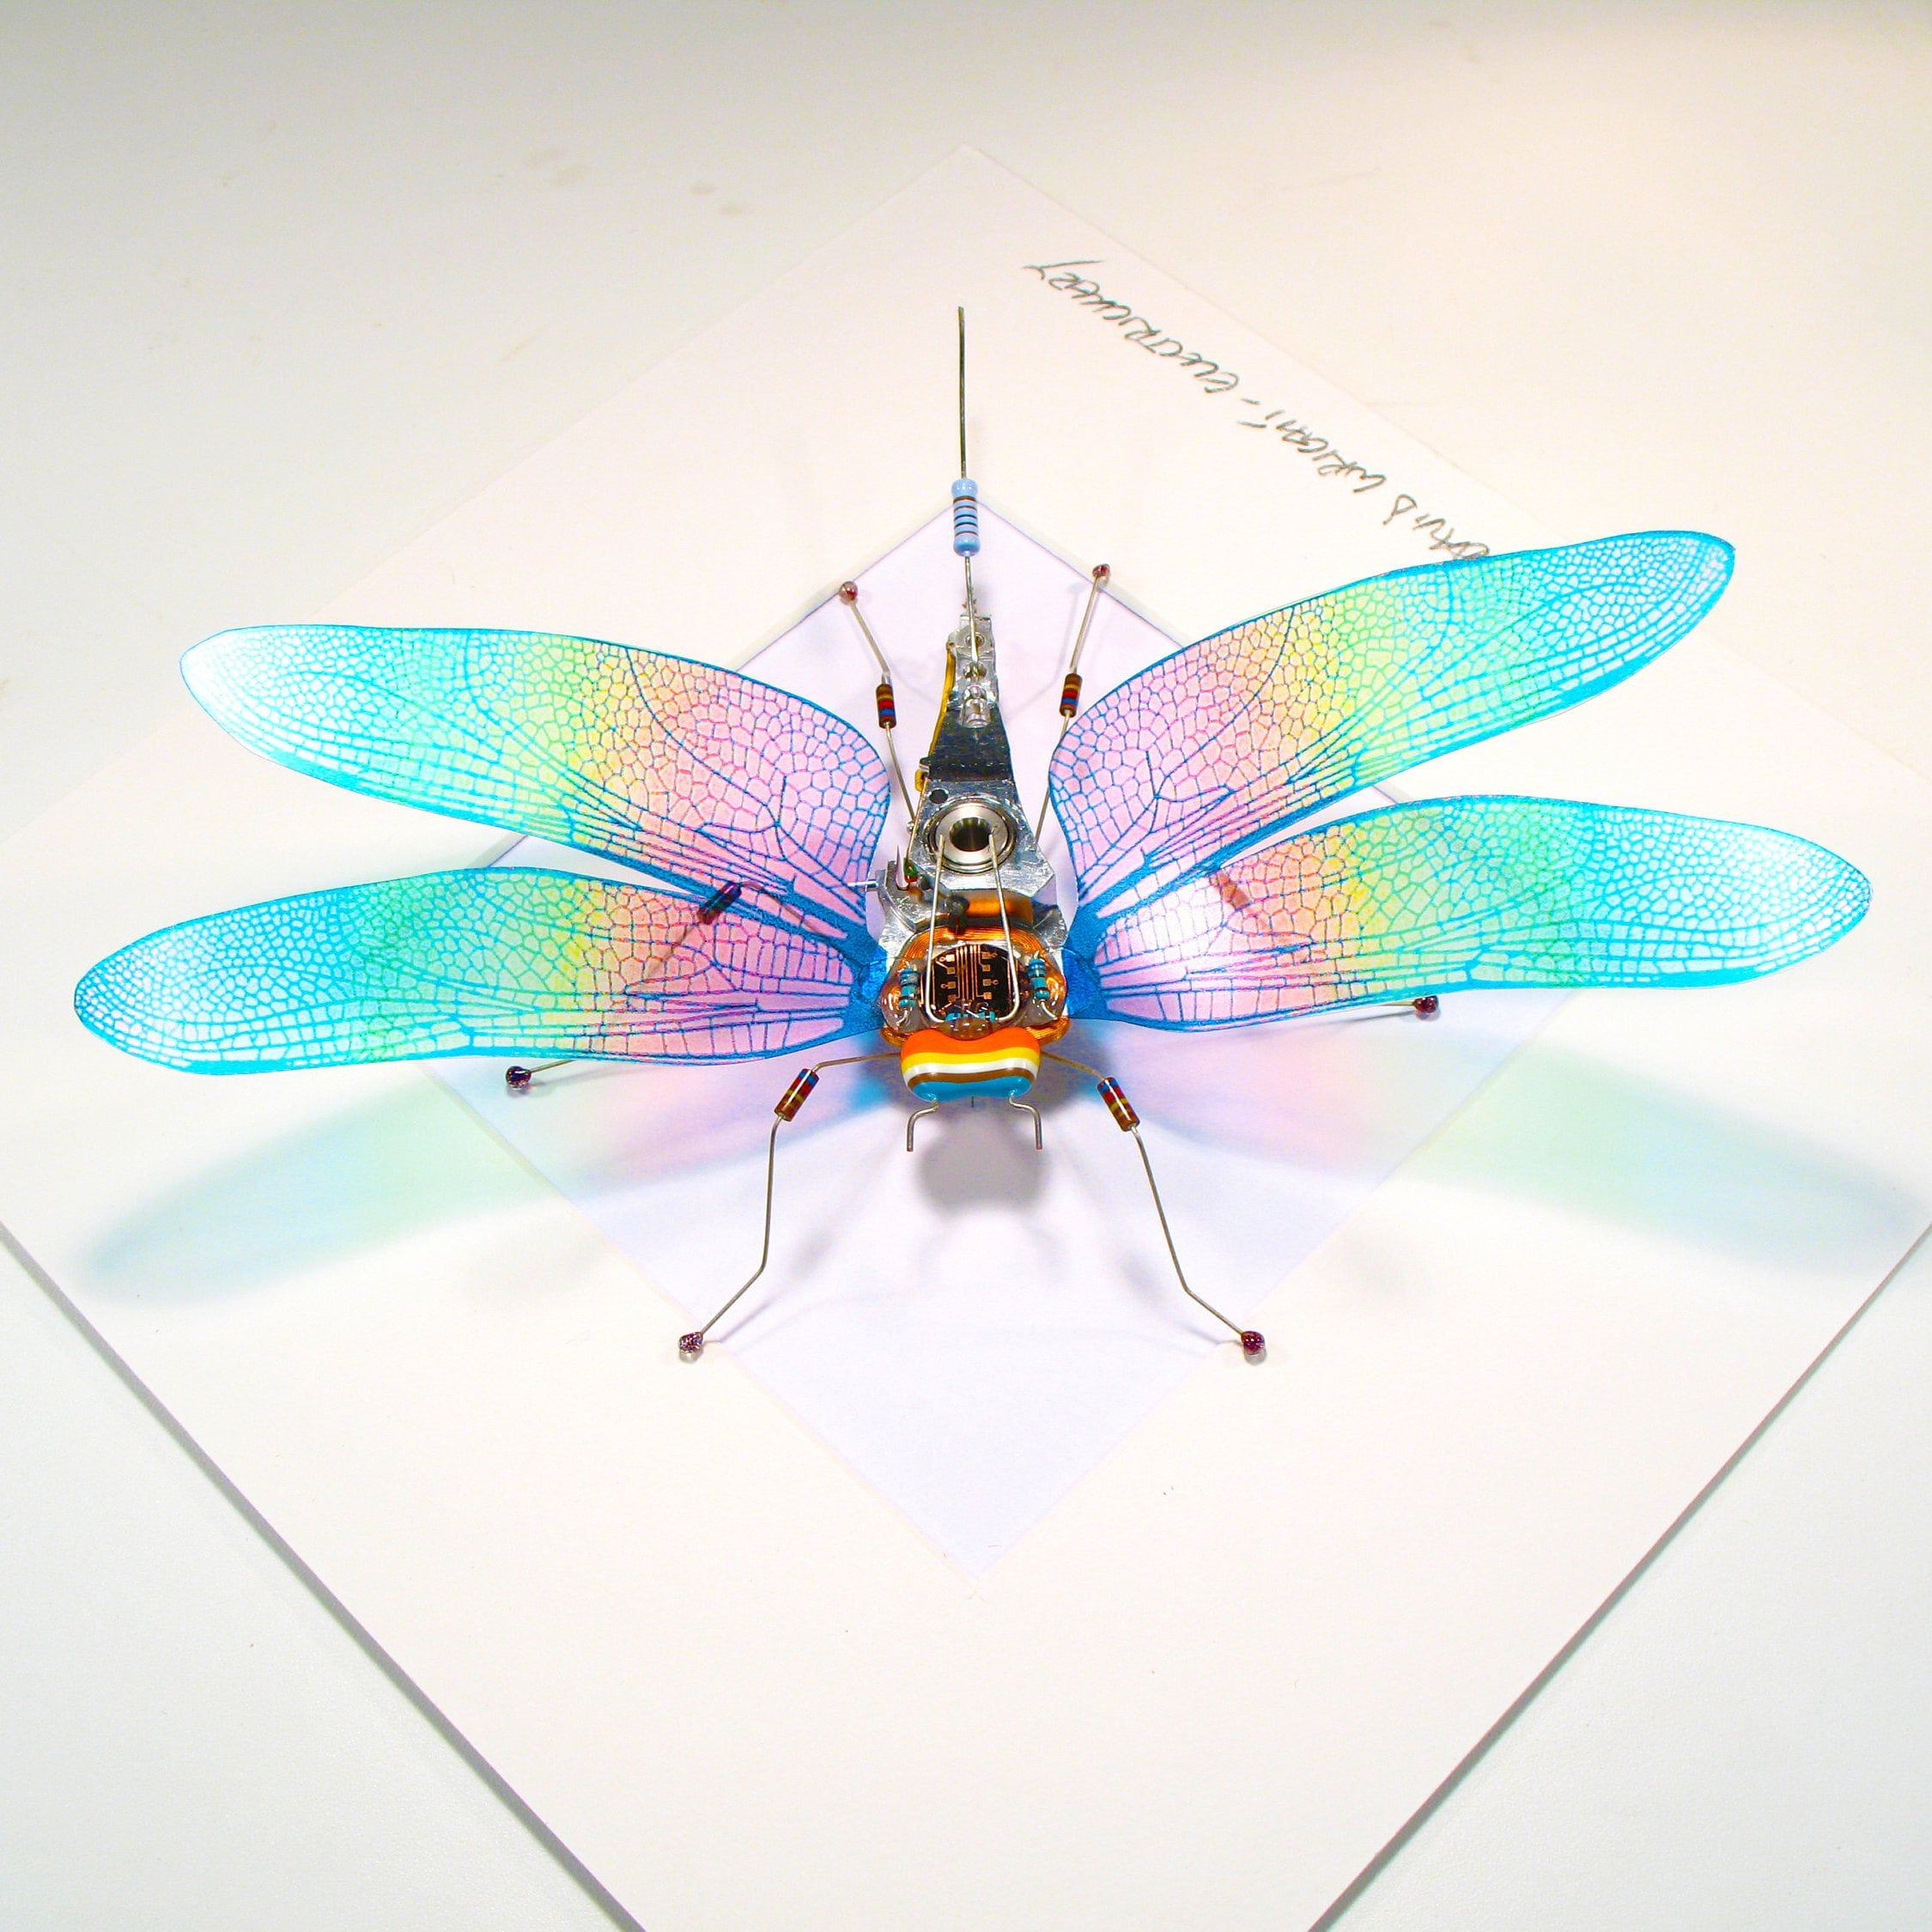 Iridescent Dragonfly Framed Wall Art | Recycled Sculpture Within Dragonflies Wall Art (View 2 of 15)